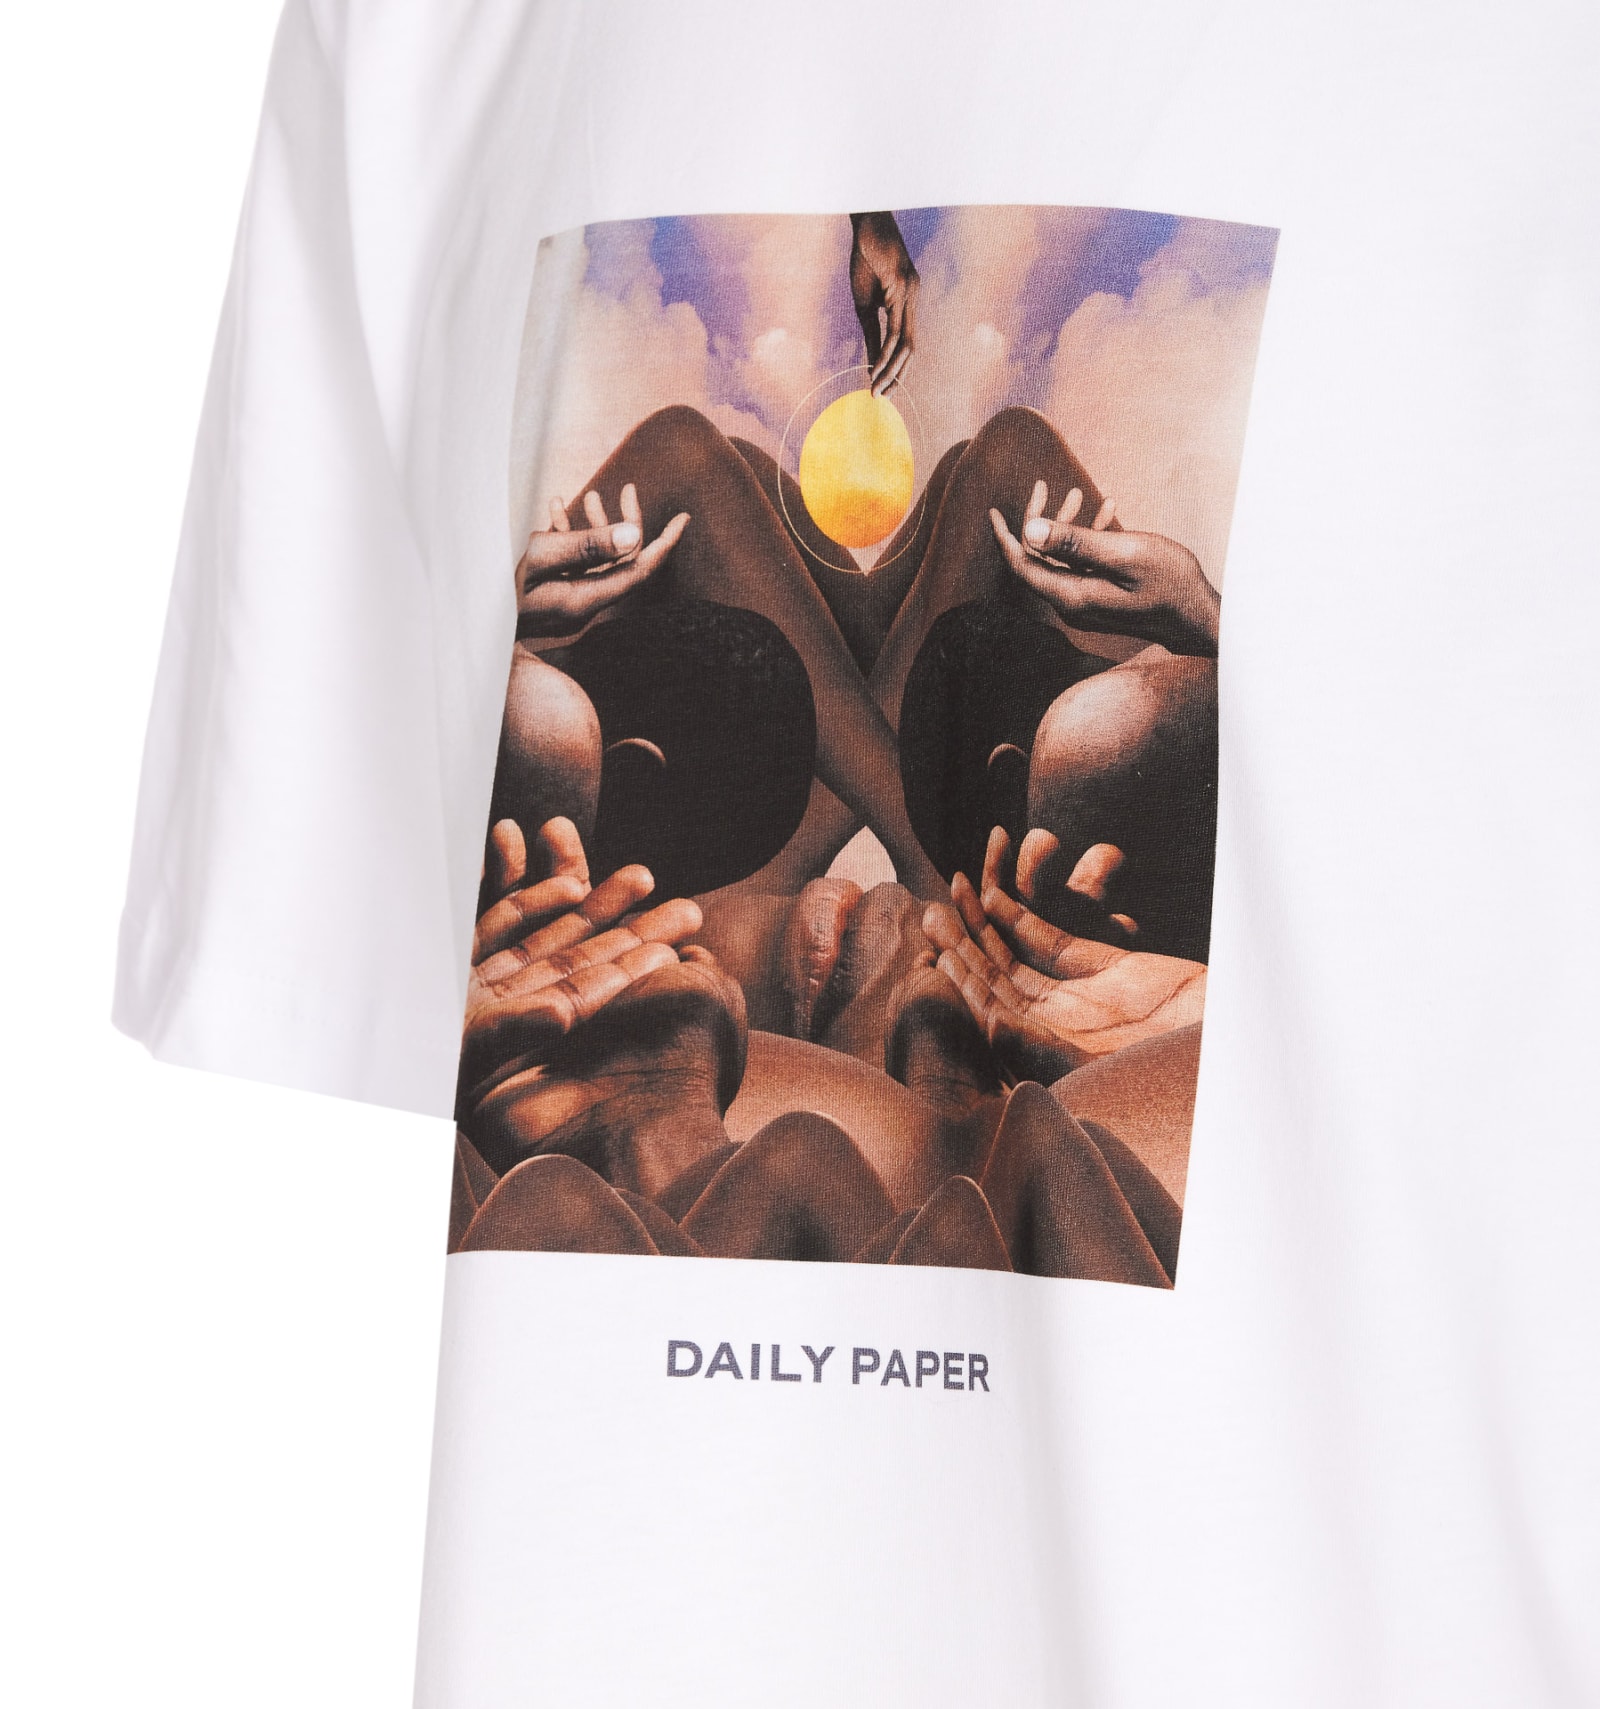 Shop Daily Paper Landscape T-shirt In White